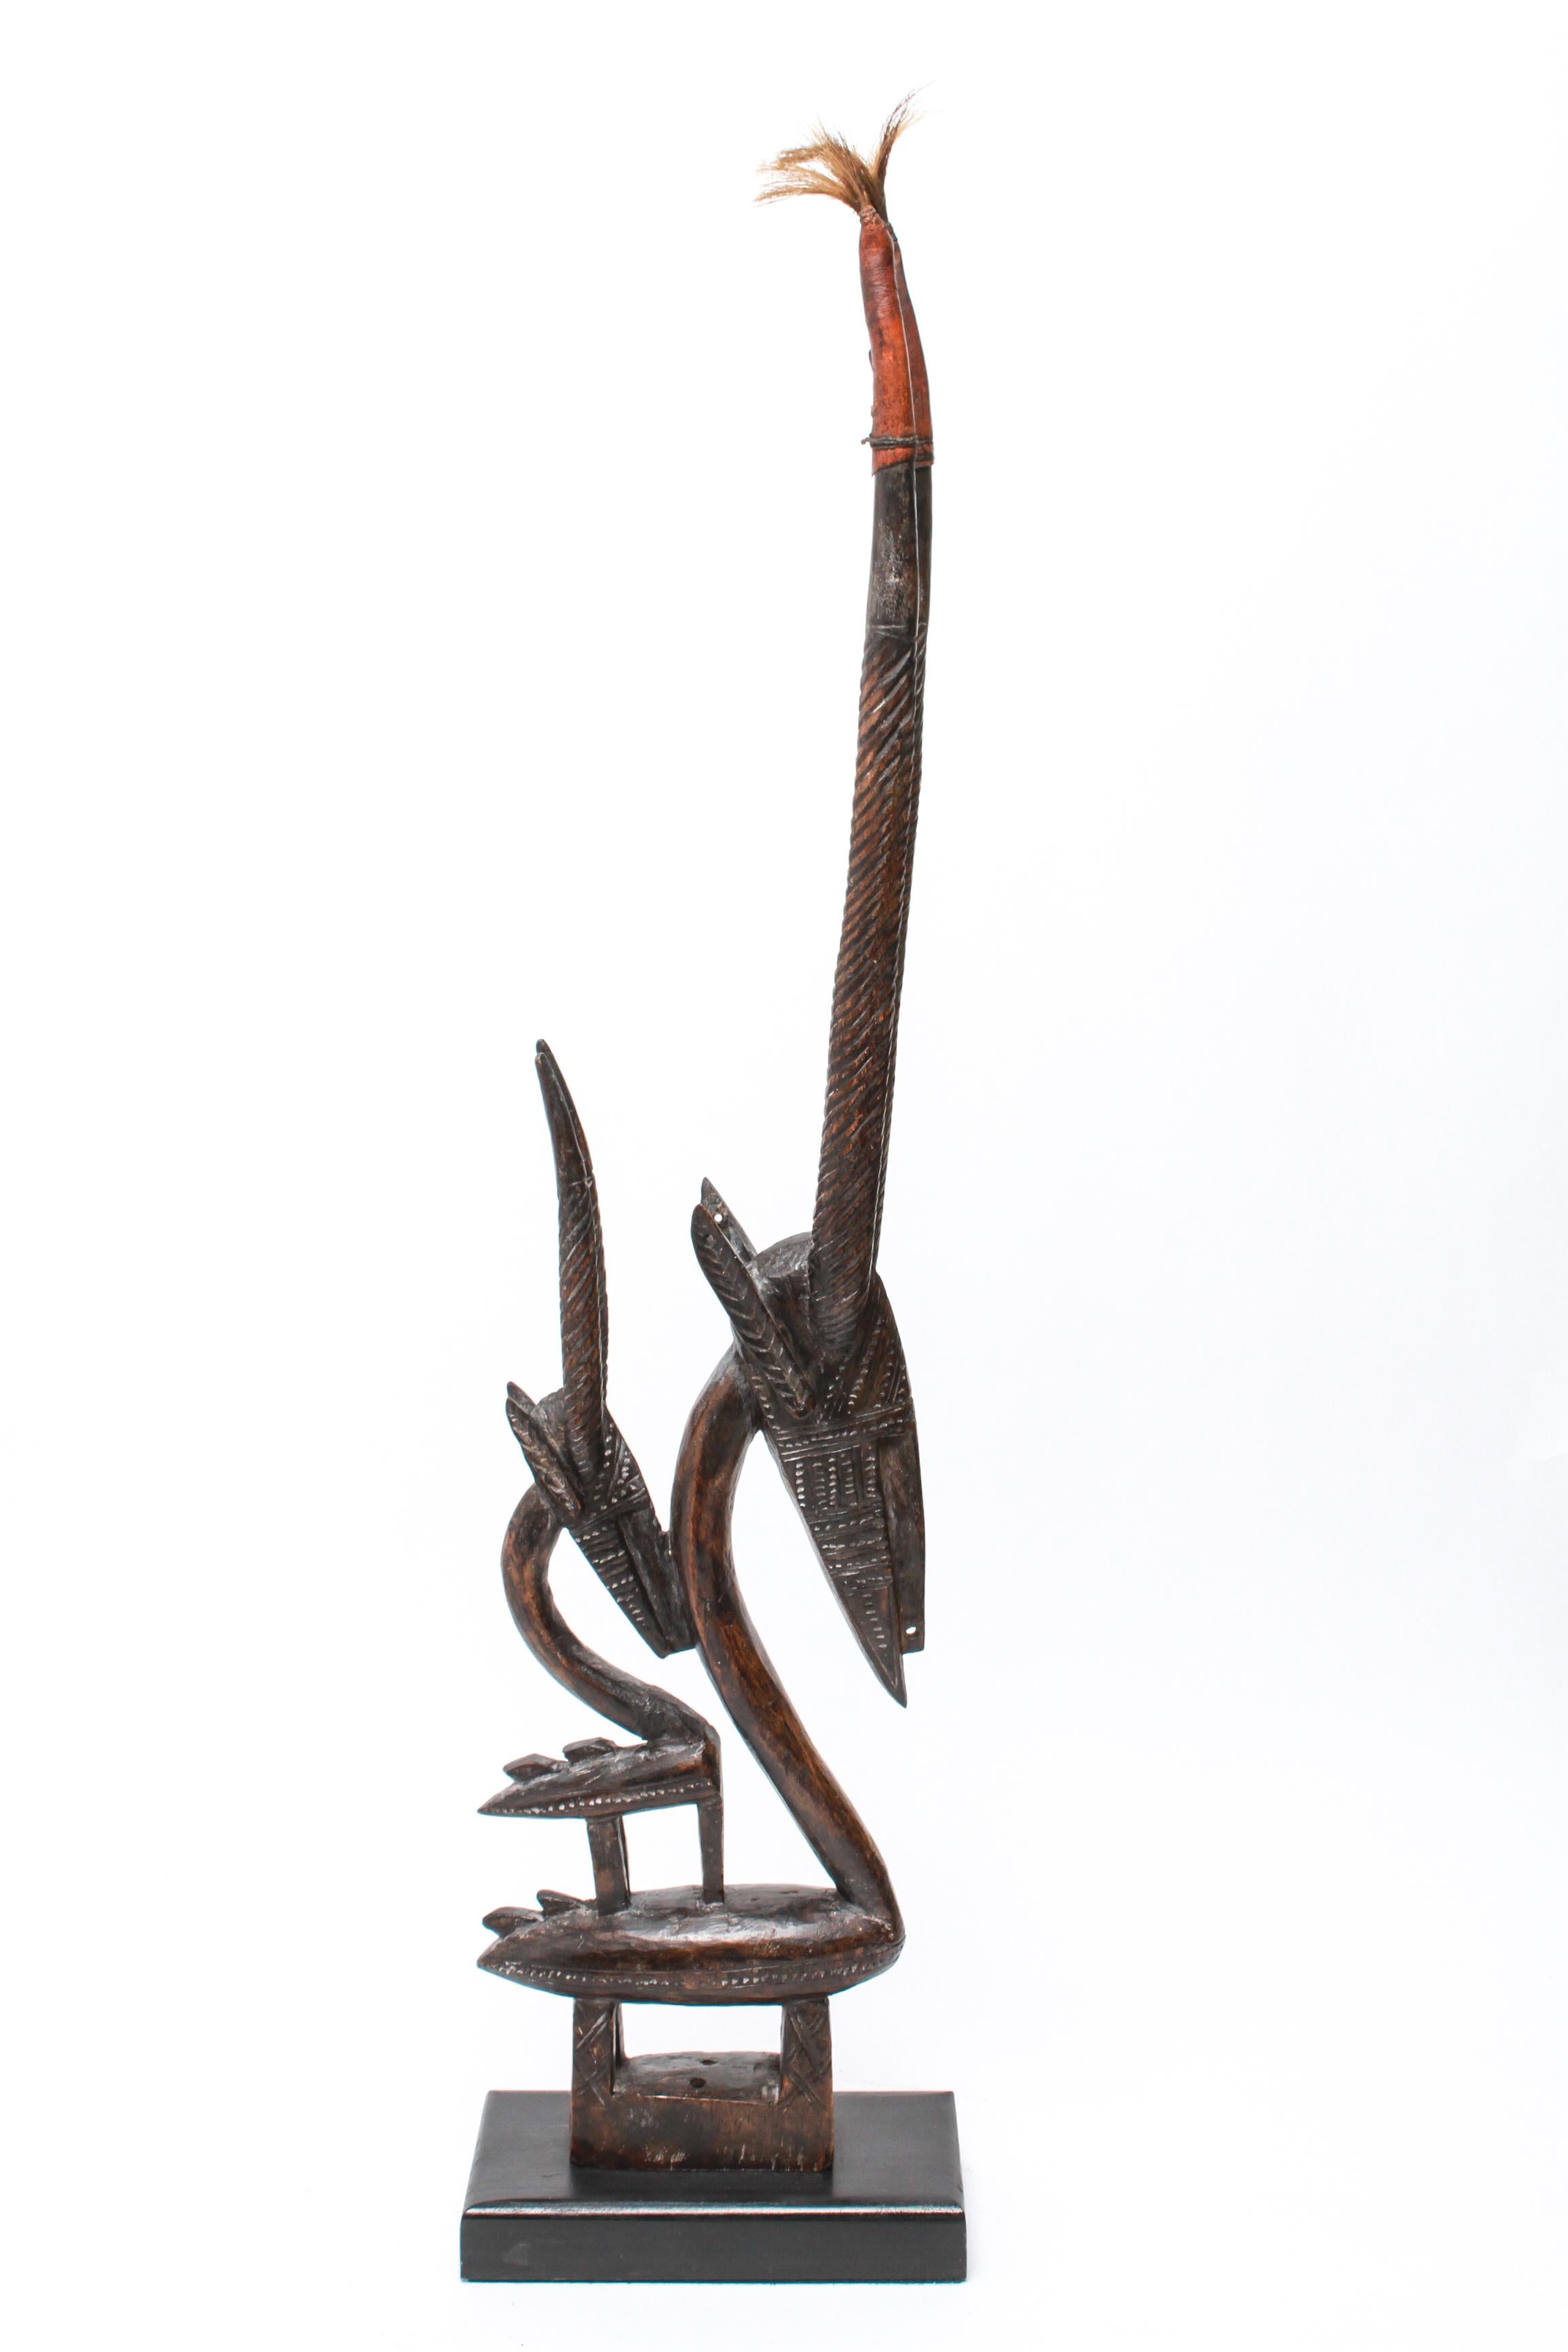 Tribal West African Bambara headdress in carved wood. The piece depicts an antelope with offspring, referred to as 